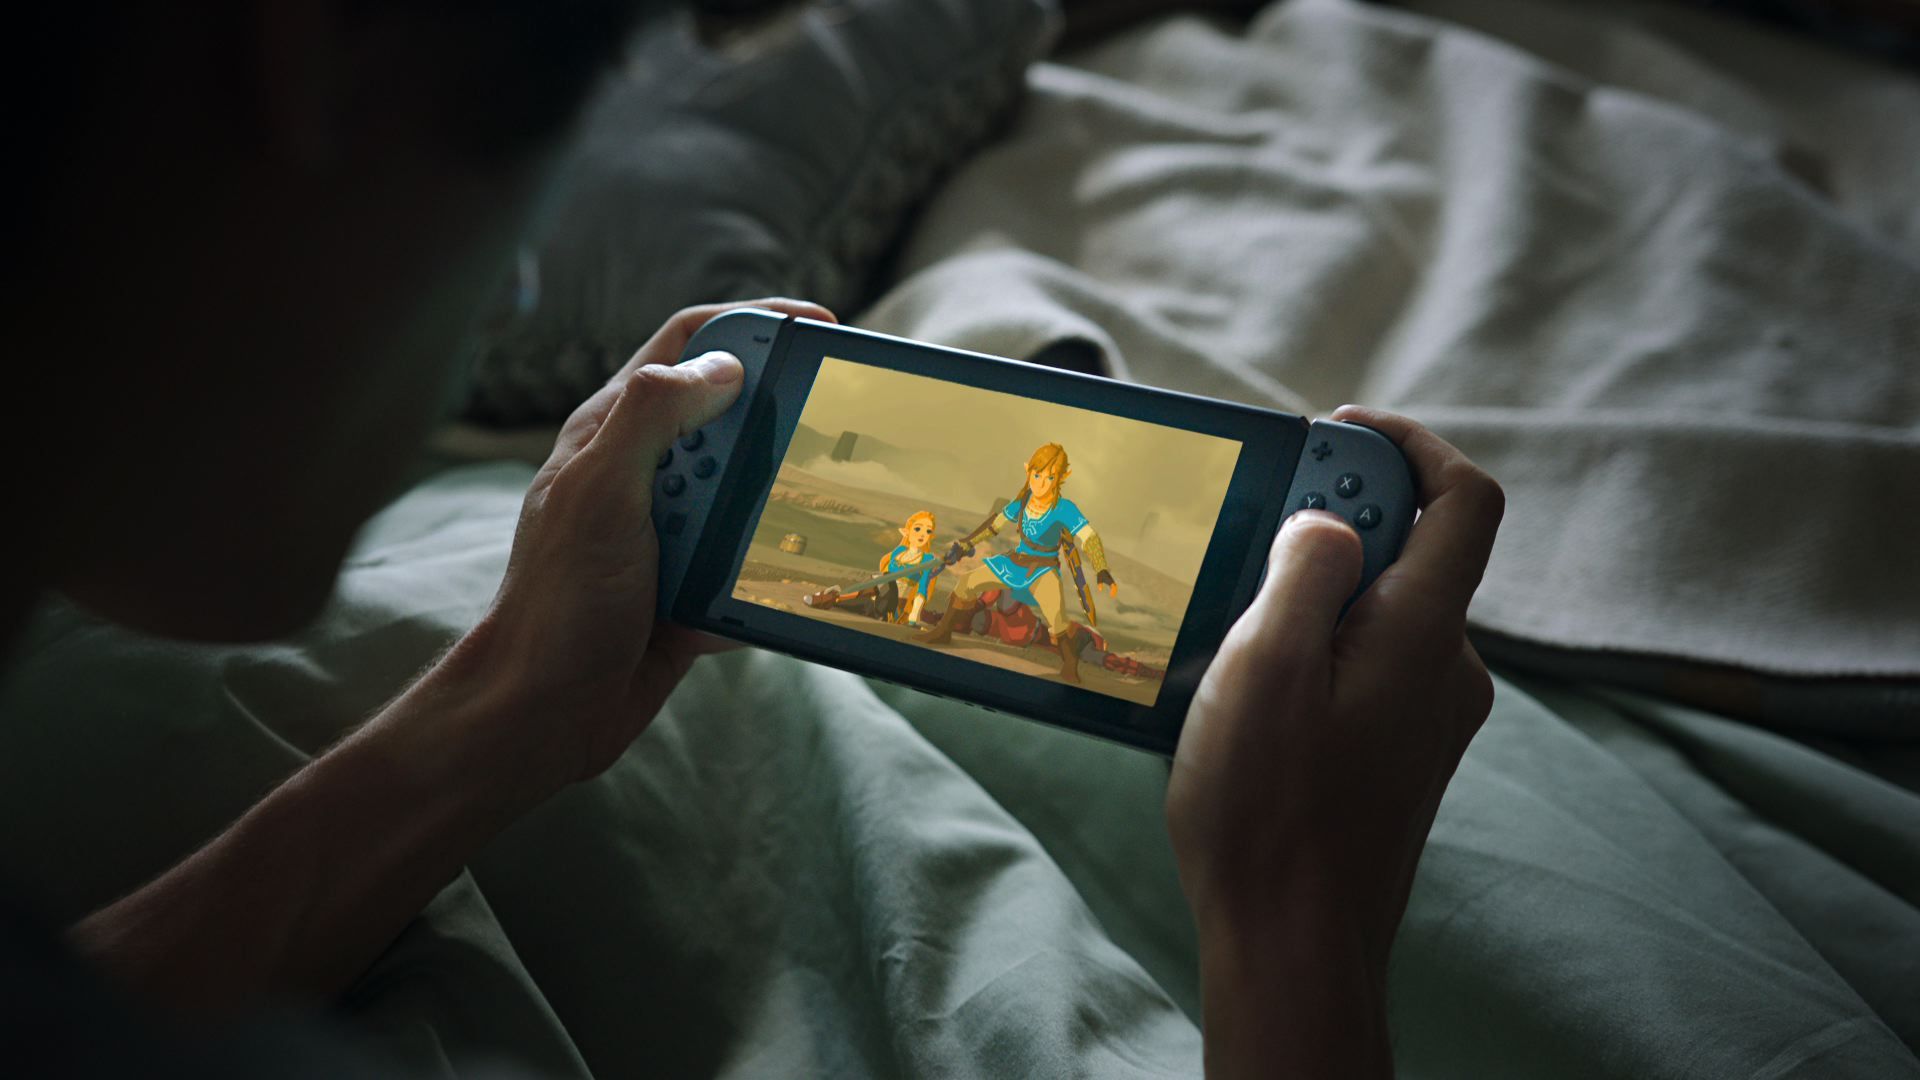 A person holds a Nintendo Switch system while laying in bed